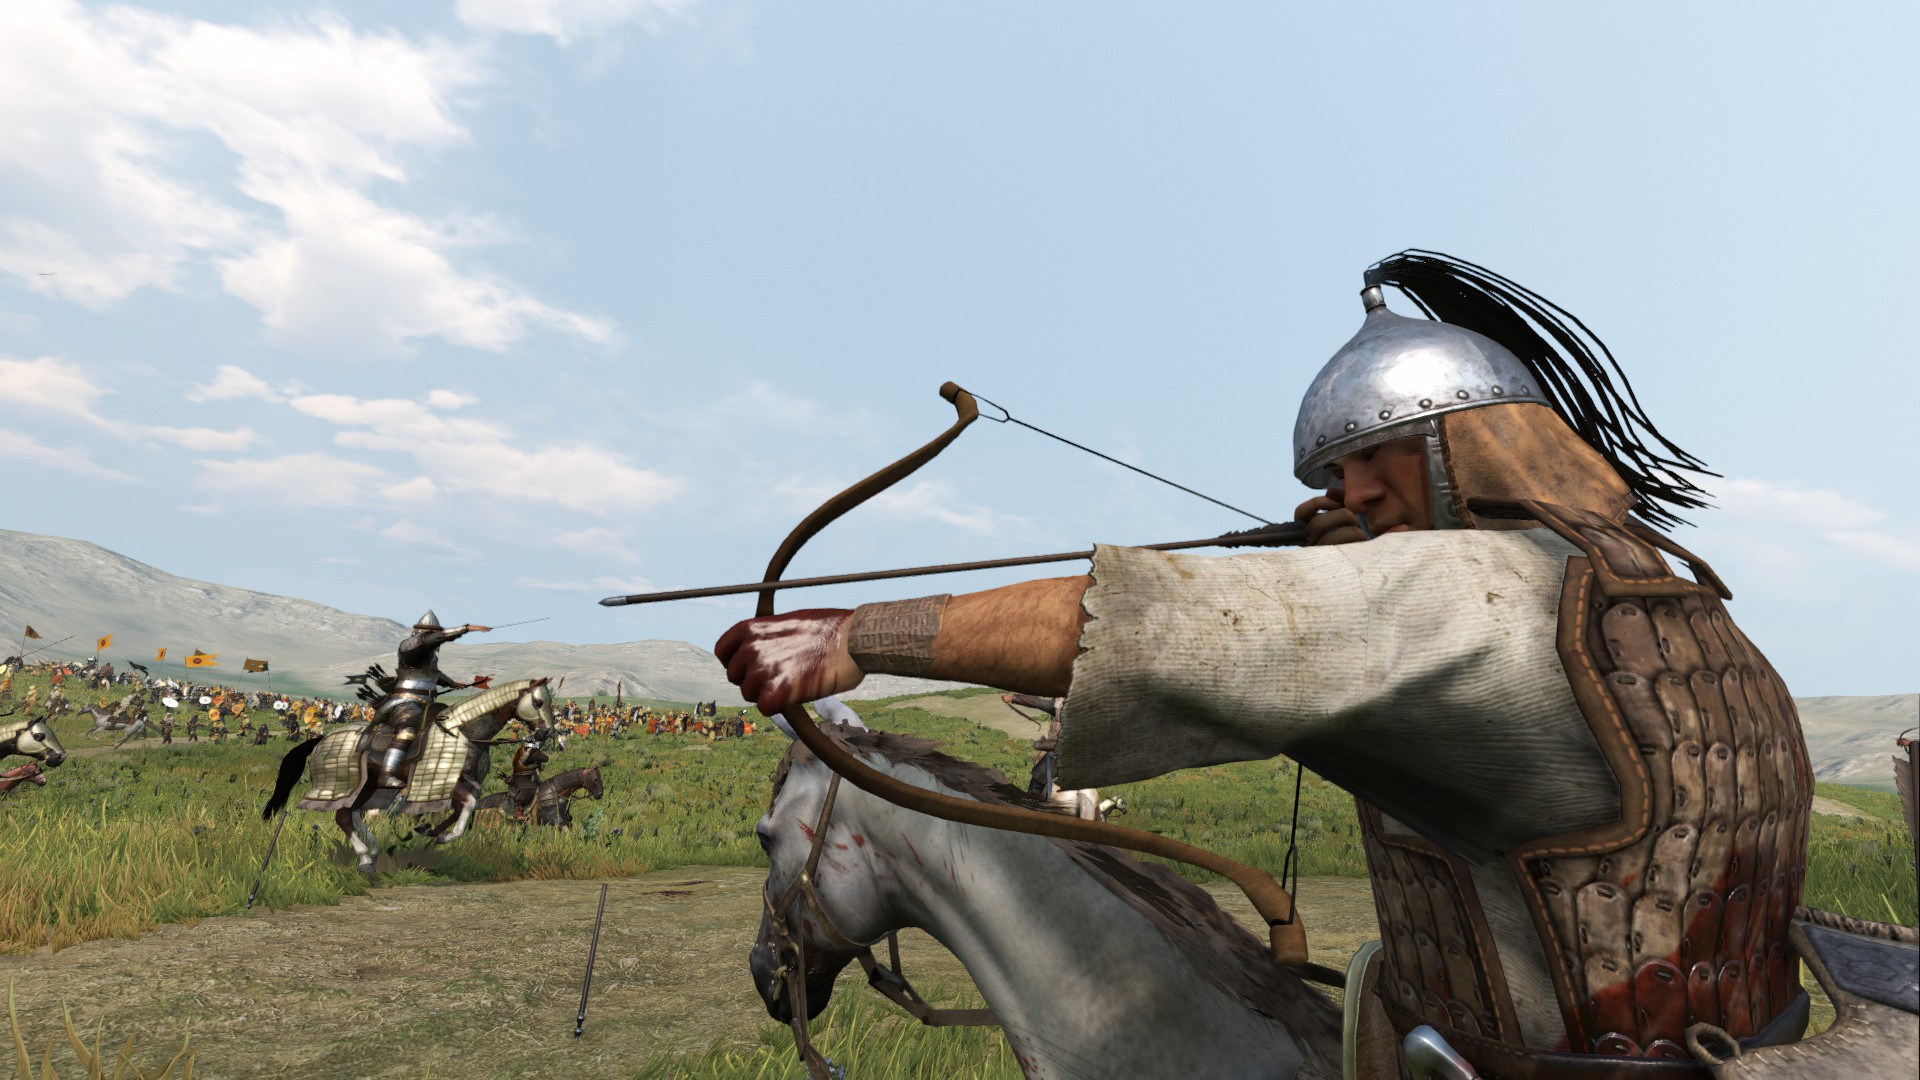 Mount and blade bannerlord караваны. Mount and Blade 2. Mount and Blade 2 1.2. Маунт блейд 2 баннерлорд. Mount & Blade II: Bannerlord атлетичность.